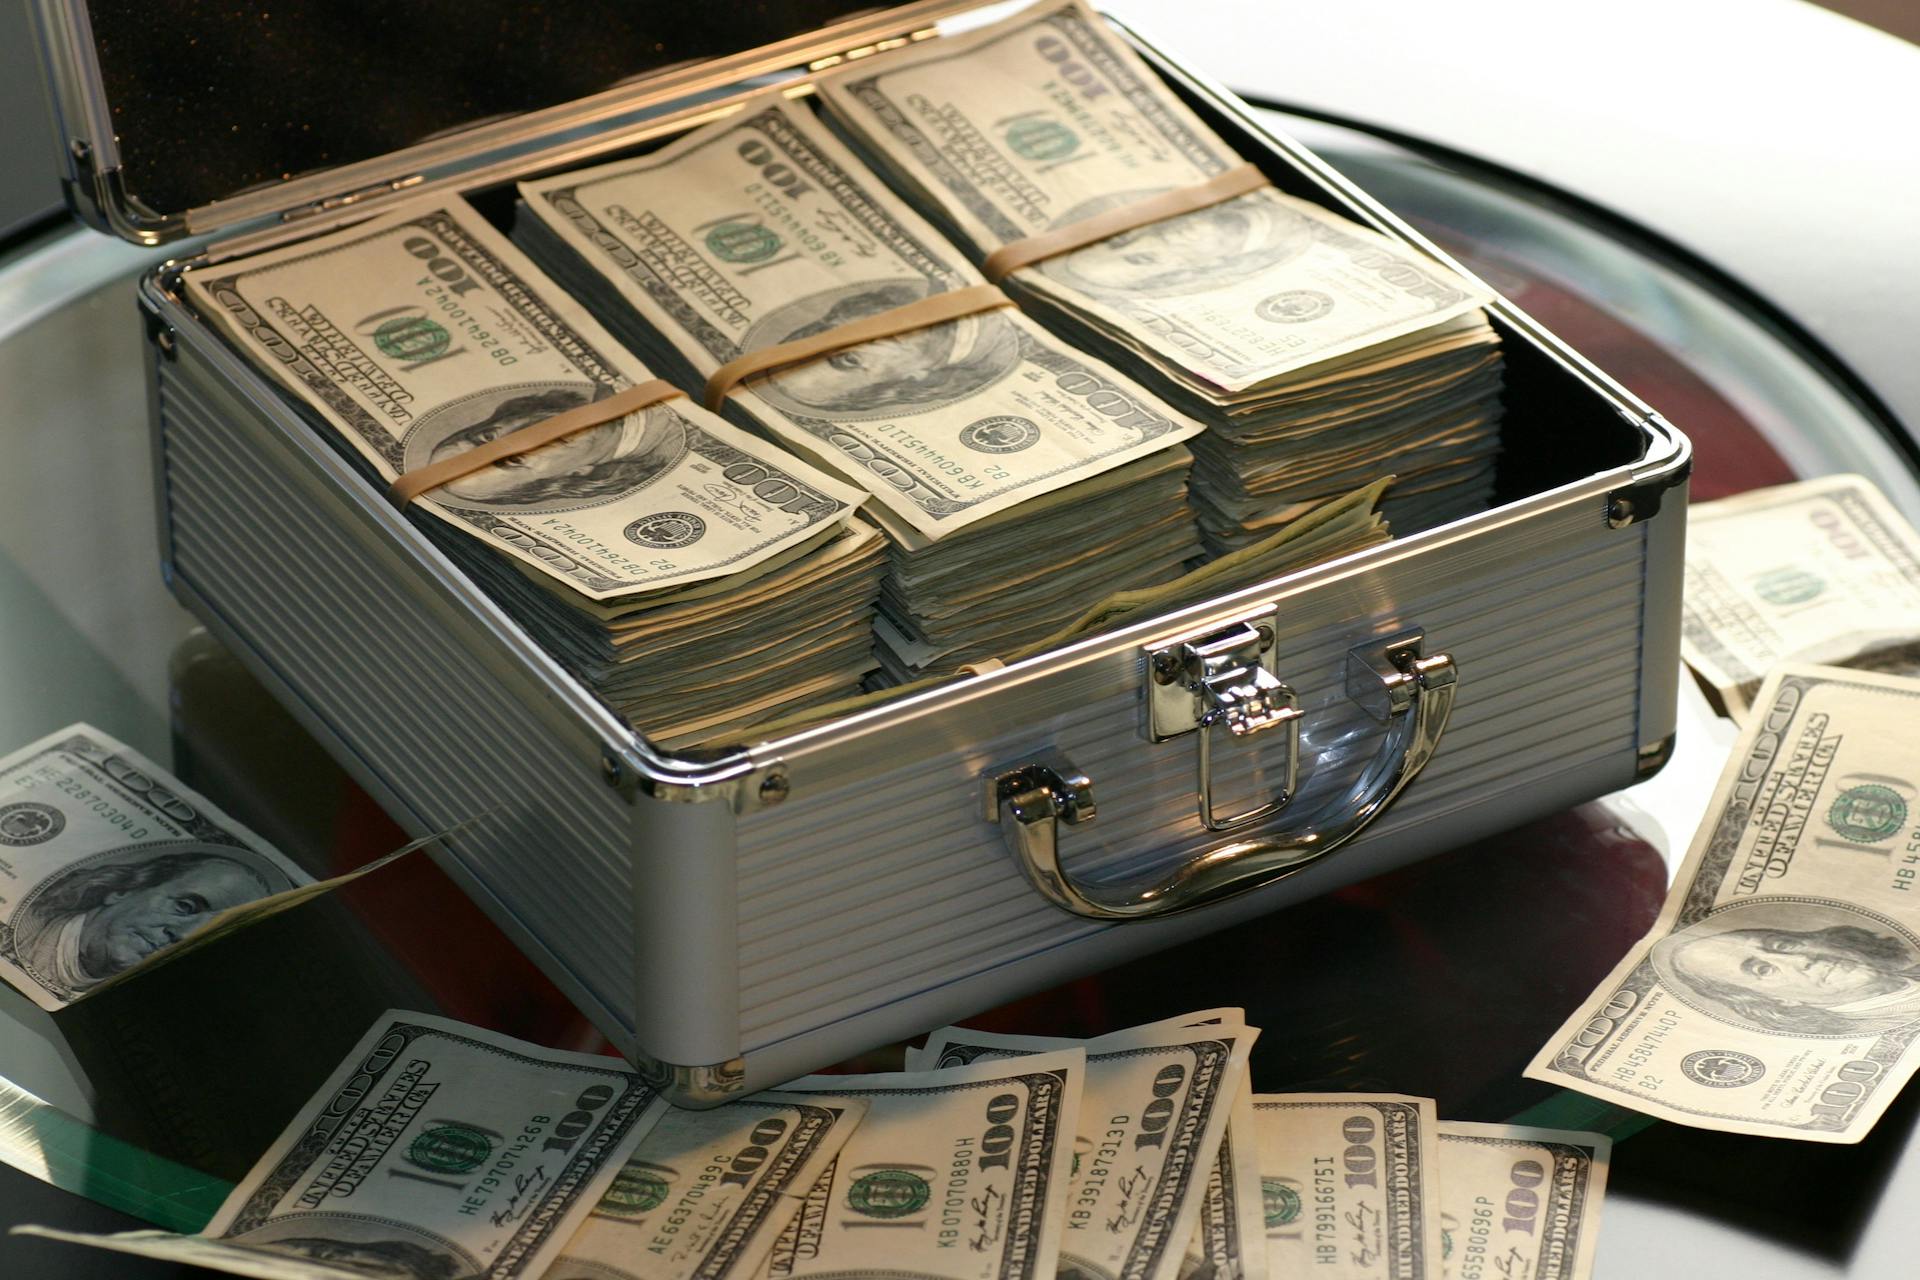 A briefcase full of money | Source: Pexels